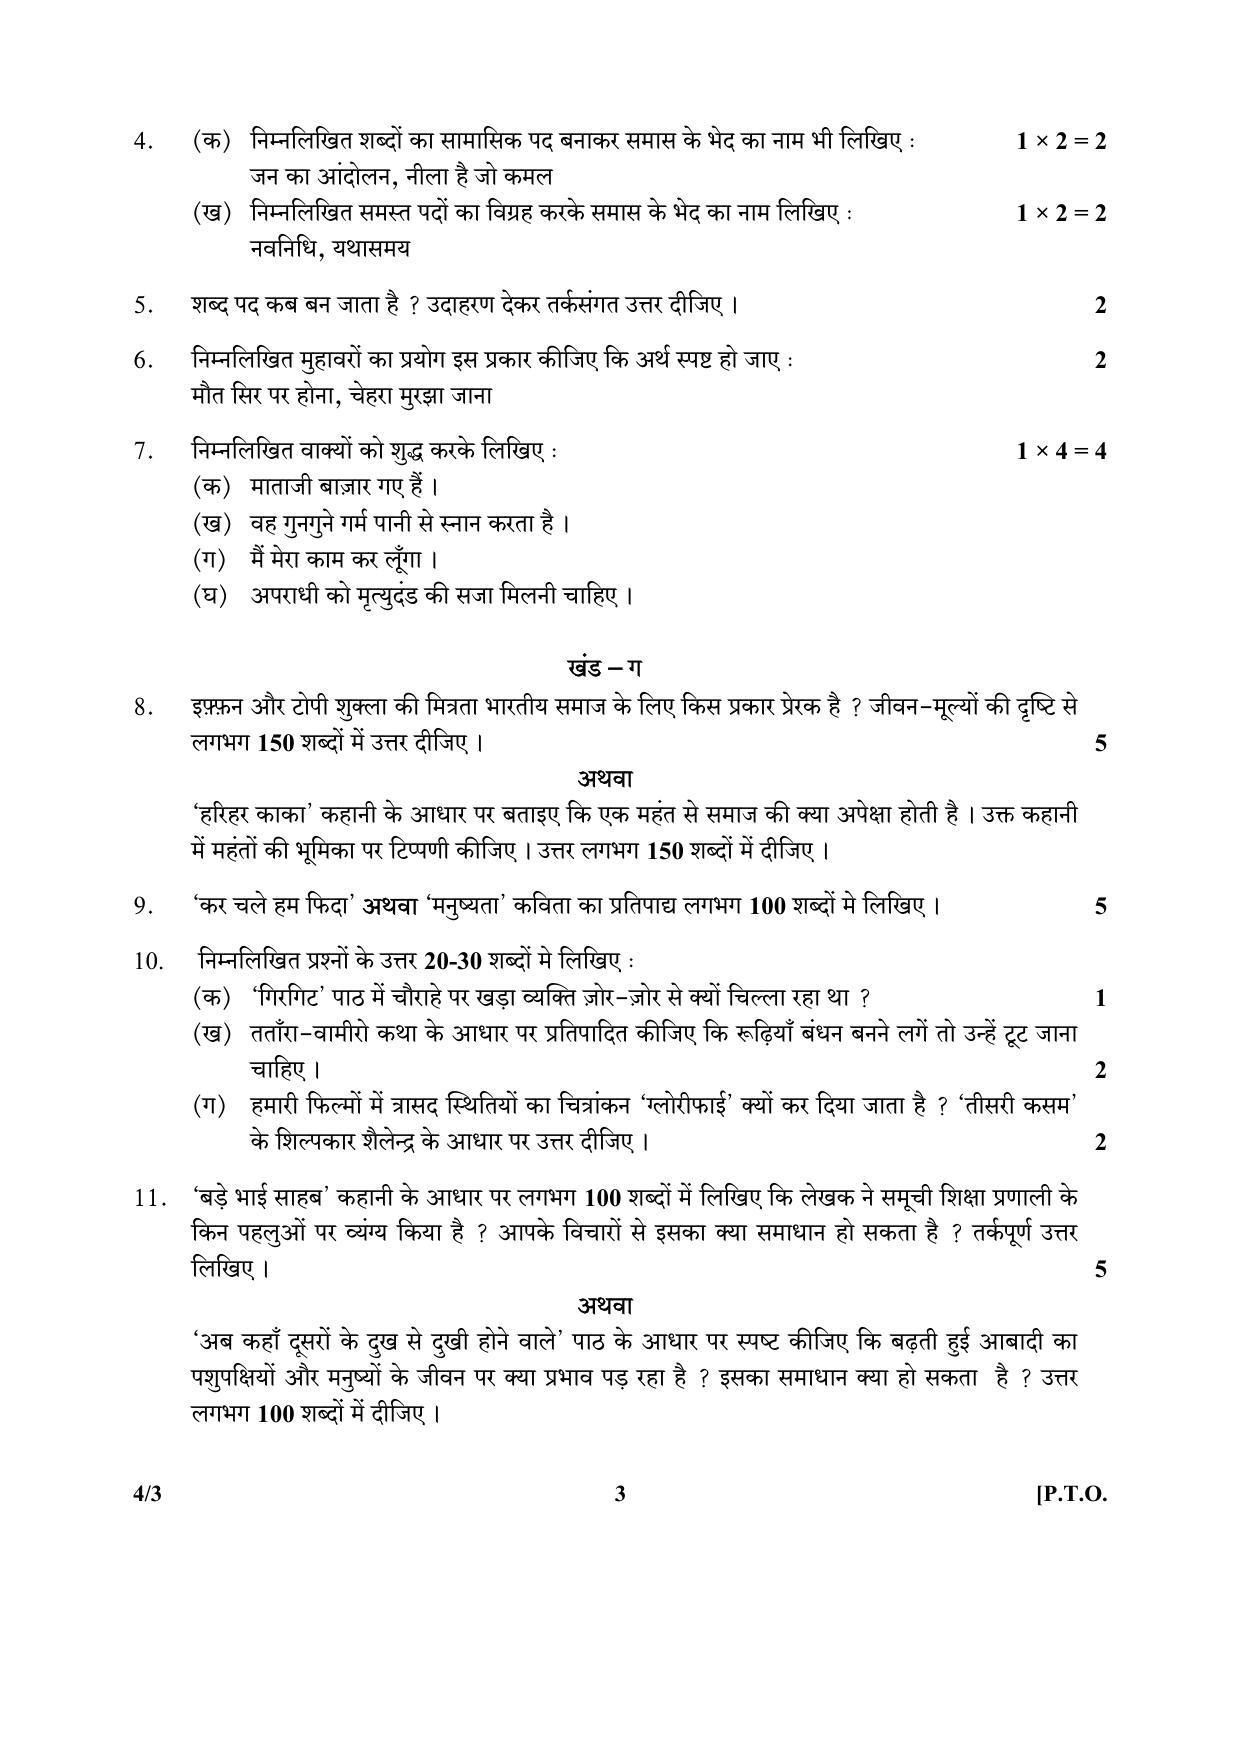 CBSE Class 10 4-3_Hindi SET-3 2018 Question Paper - Page 3